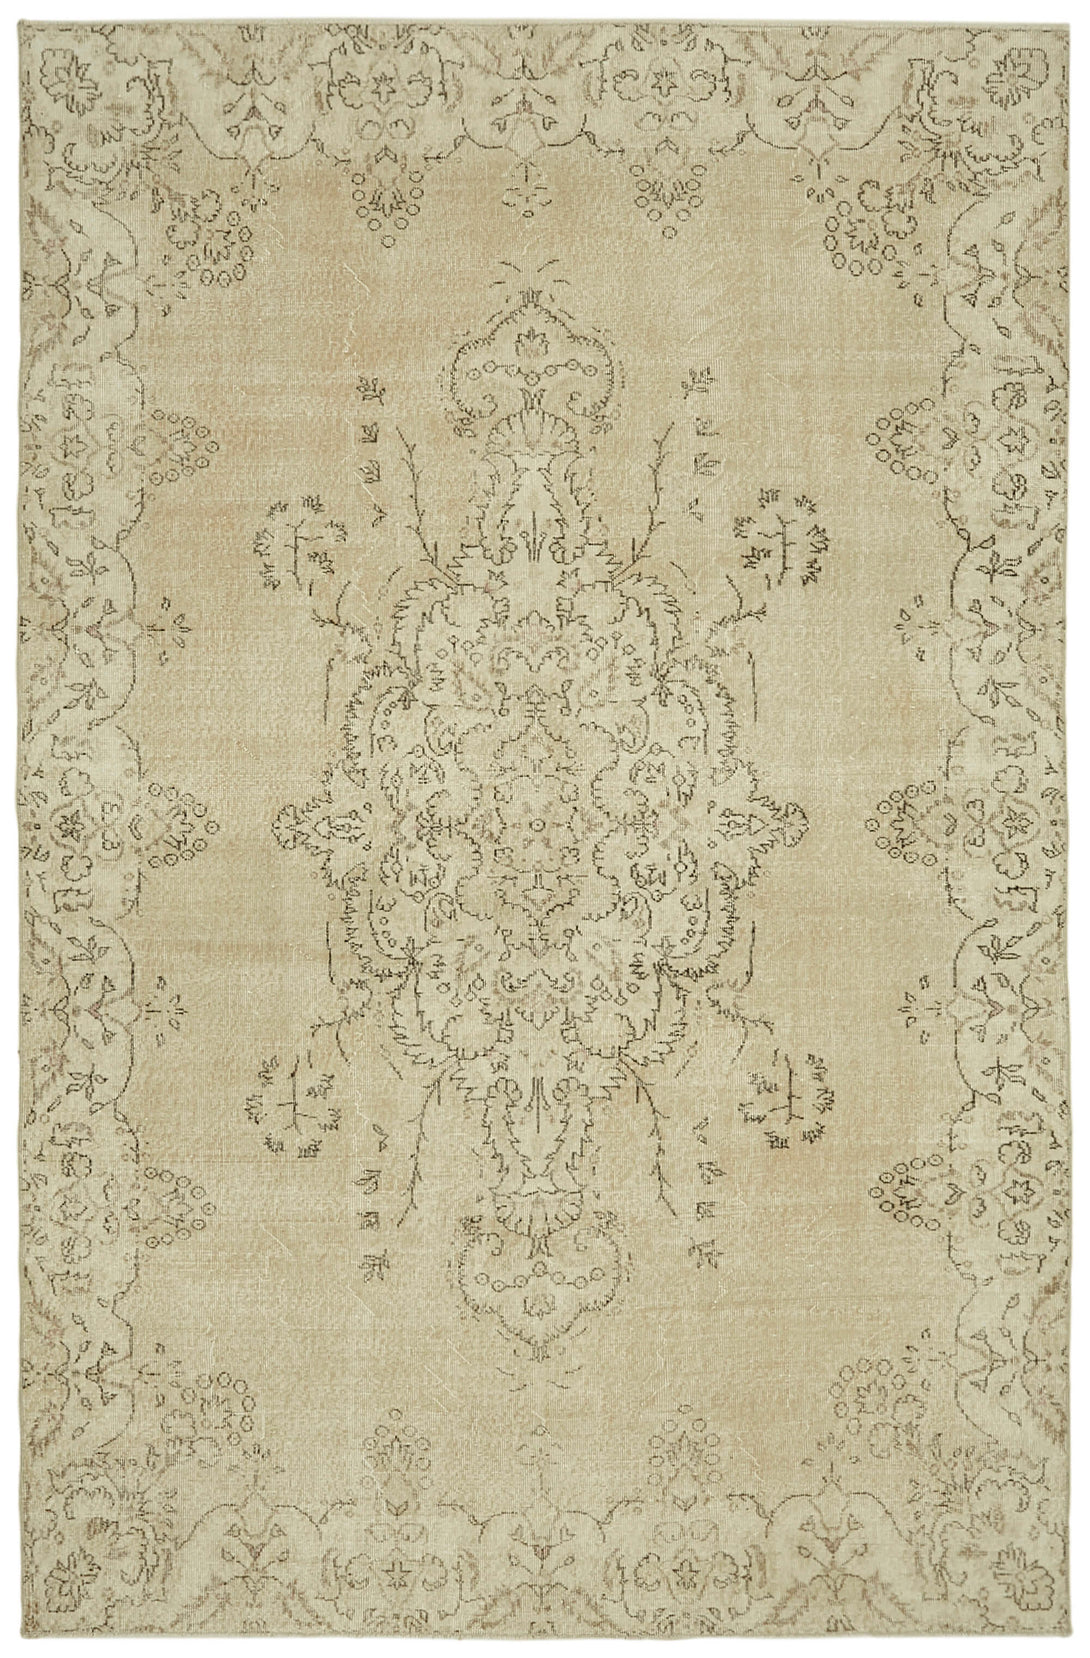 Handmade White Wash Area Rug > Design# OL-AC-41451 > Size: 6'-9" x 10'-3", Carpet Culture Rugs, Handmade Rugs, NYC Rugs, New Rugs, Shop Rugs, Rug Store, Outlet Rugs, SoHo Rugs, Rugs in USA